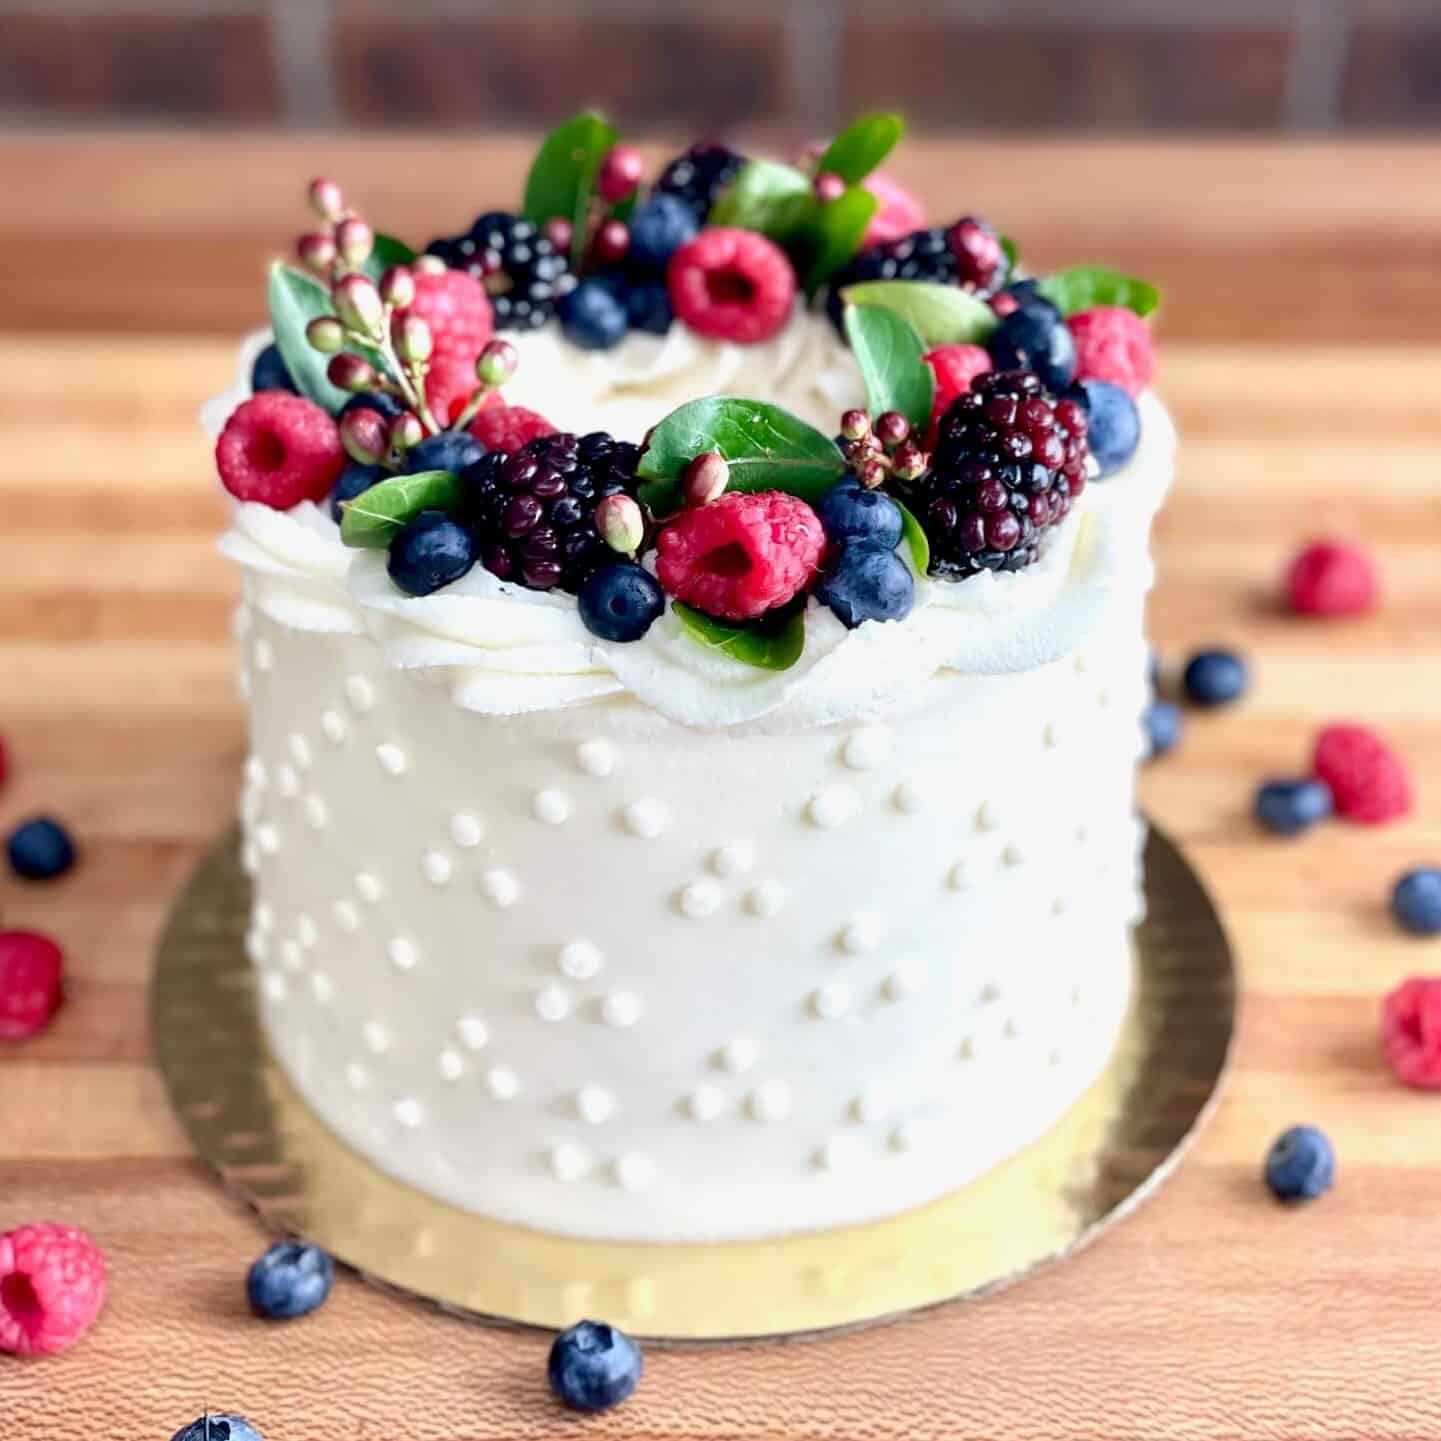 https://amycakesbakes.com/wp-content/uploads/2021/07/Vanilla-Almond-Cake-with-Triple-Berry-Filling-21.jpg